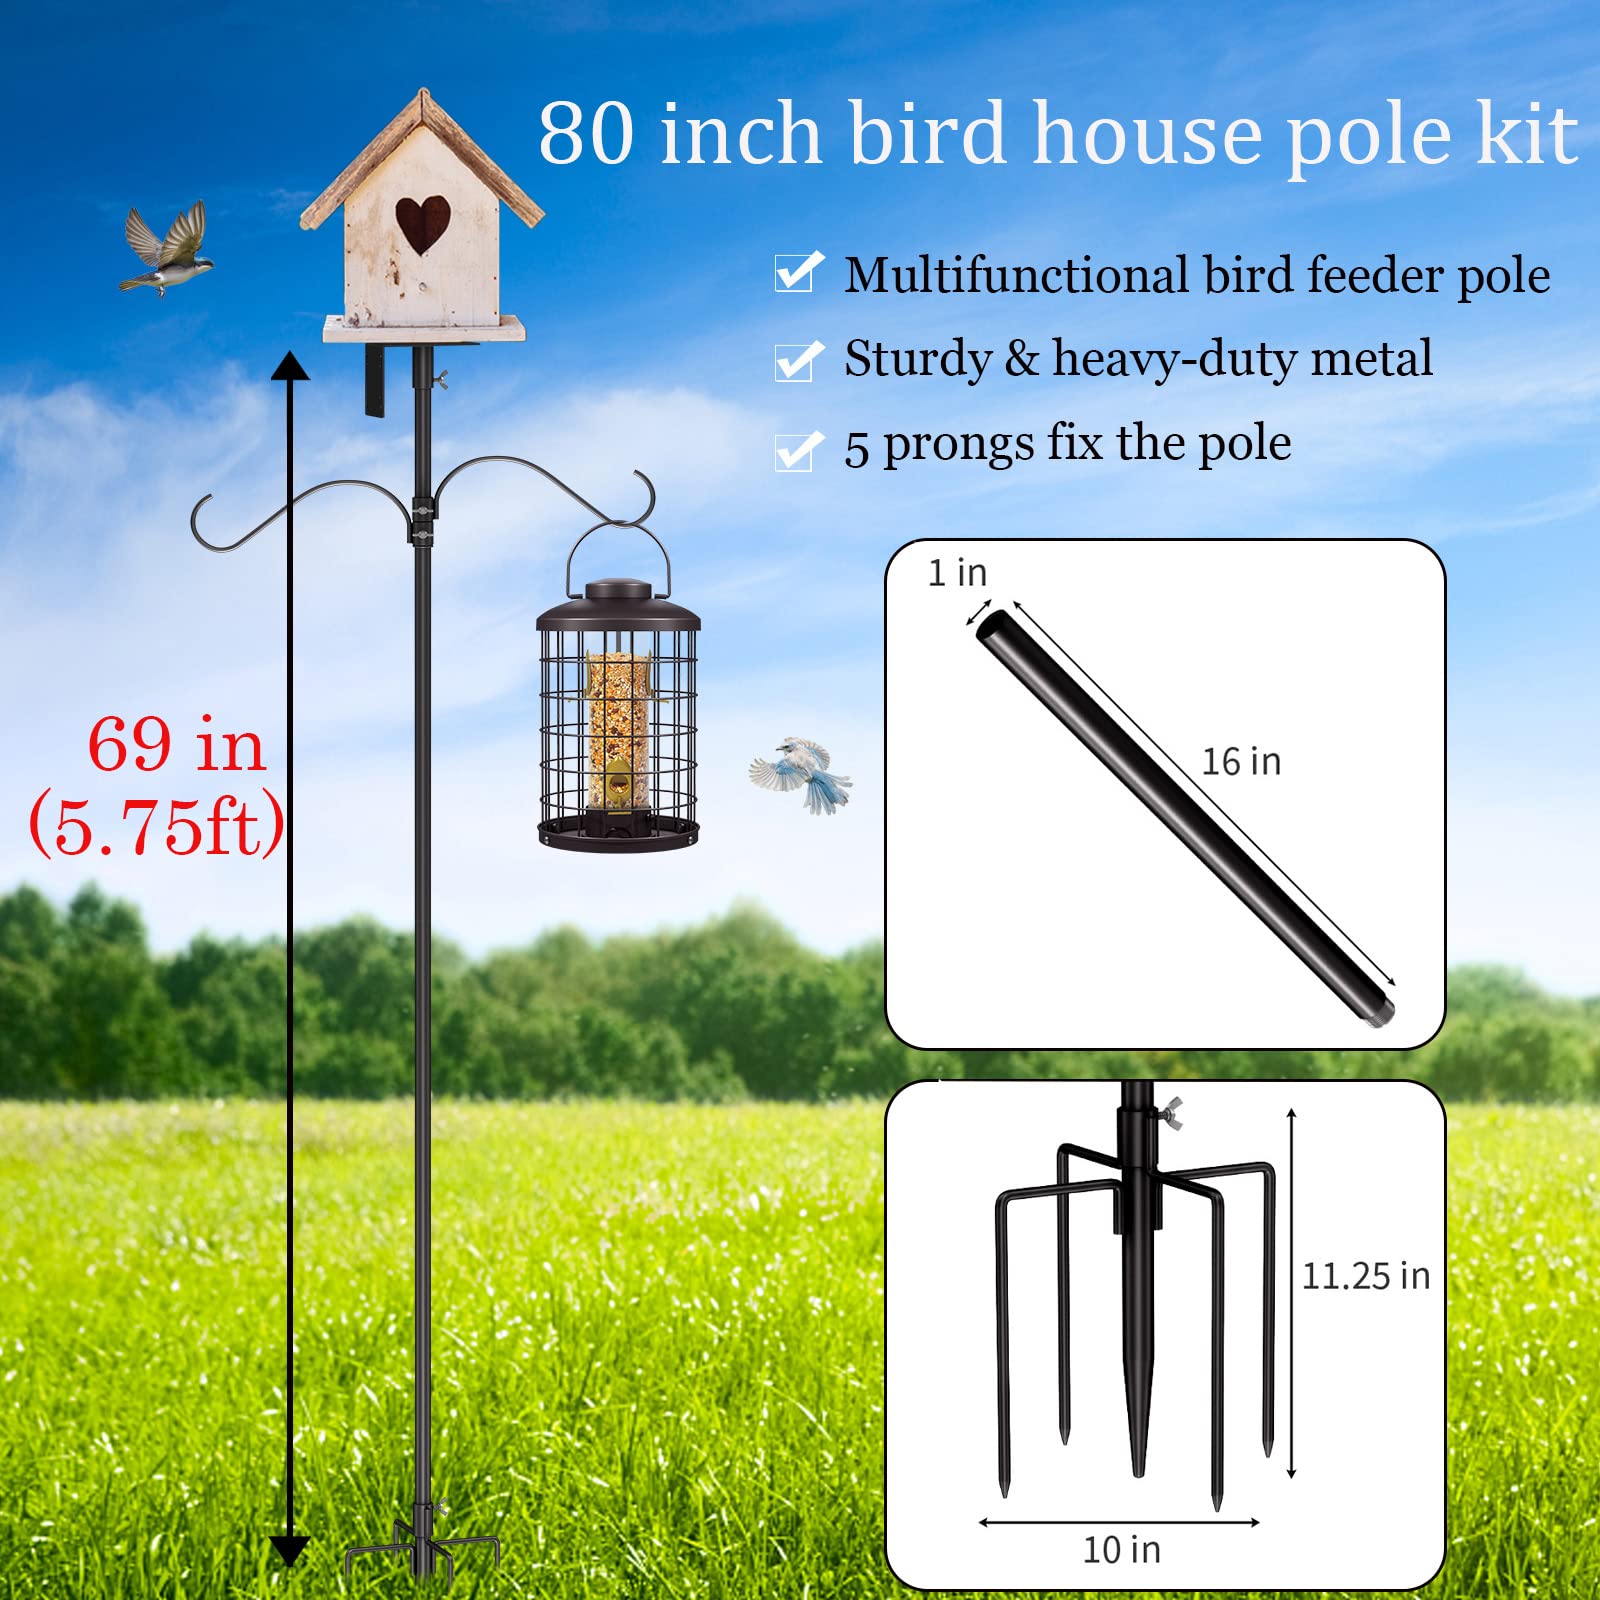 Mosloly Bird House Pole Kit 80inch - Universal Metal Bird Feeders Pole Mount Set with 5-Prongs Base and 2 Hanging Arms, Bird Feeding Station for Bird Watching, Plant Hanger